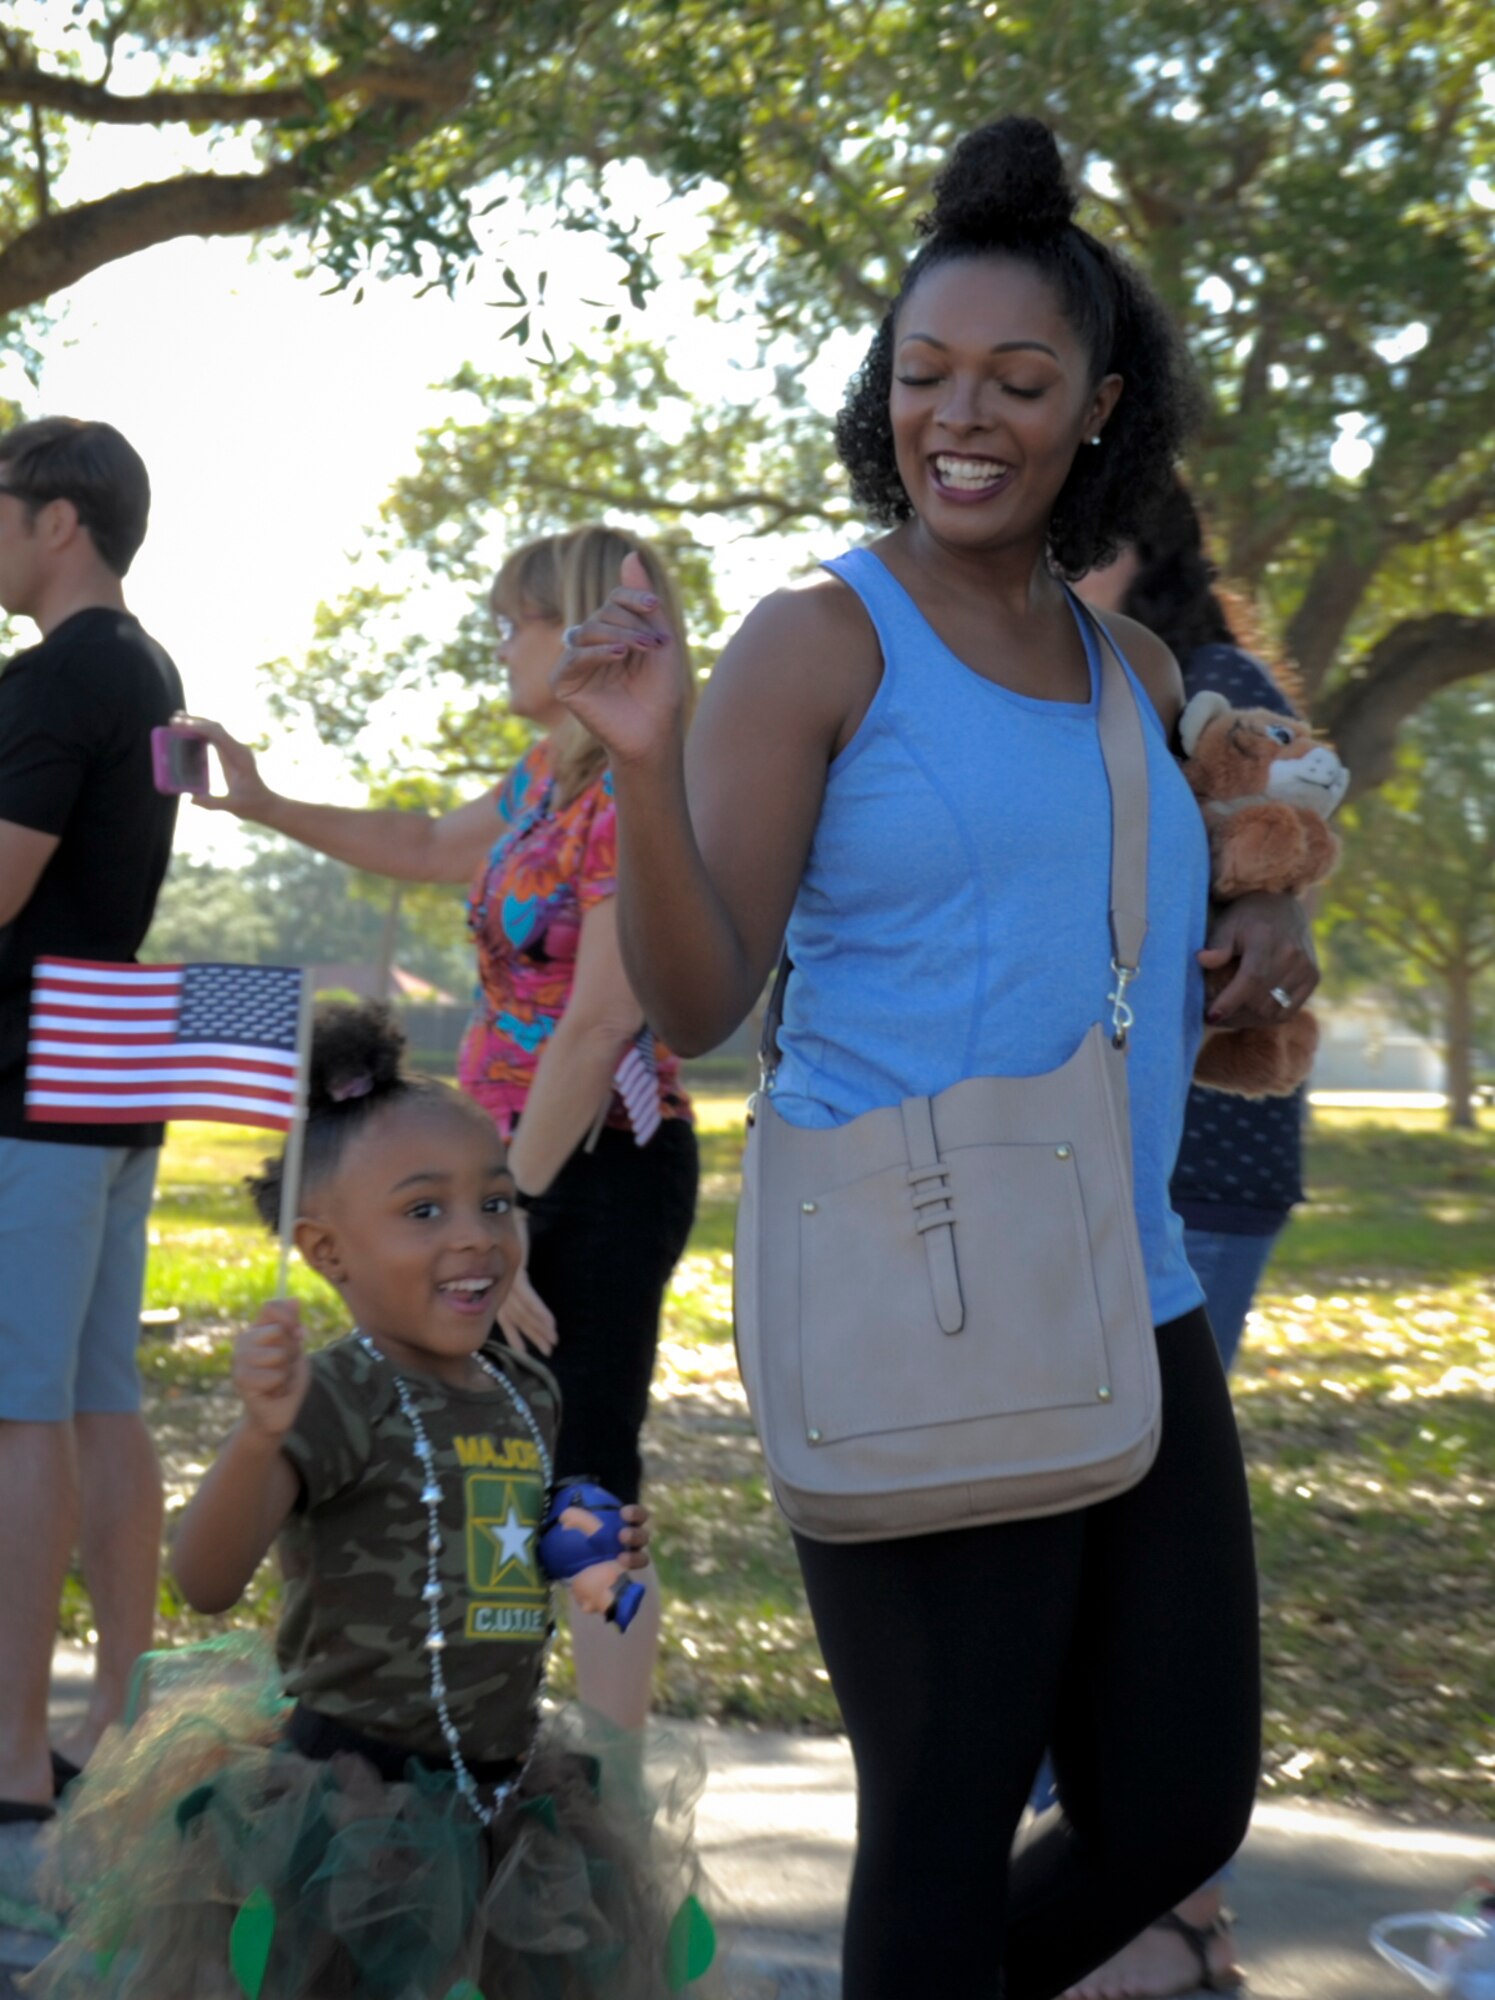 A parent and child walk in the Month of the Military Child parade at MacDill Air Force Base, Fla., April 21, 2017. April is Month of the Military Child and throughout the month MacDill hosted various events in celebration including a parade and numerous school events. (U.S. Air Force photo by Airman 1st Class Mariette Adams)